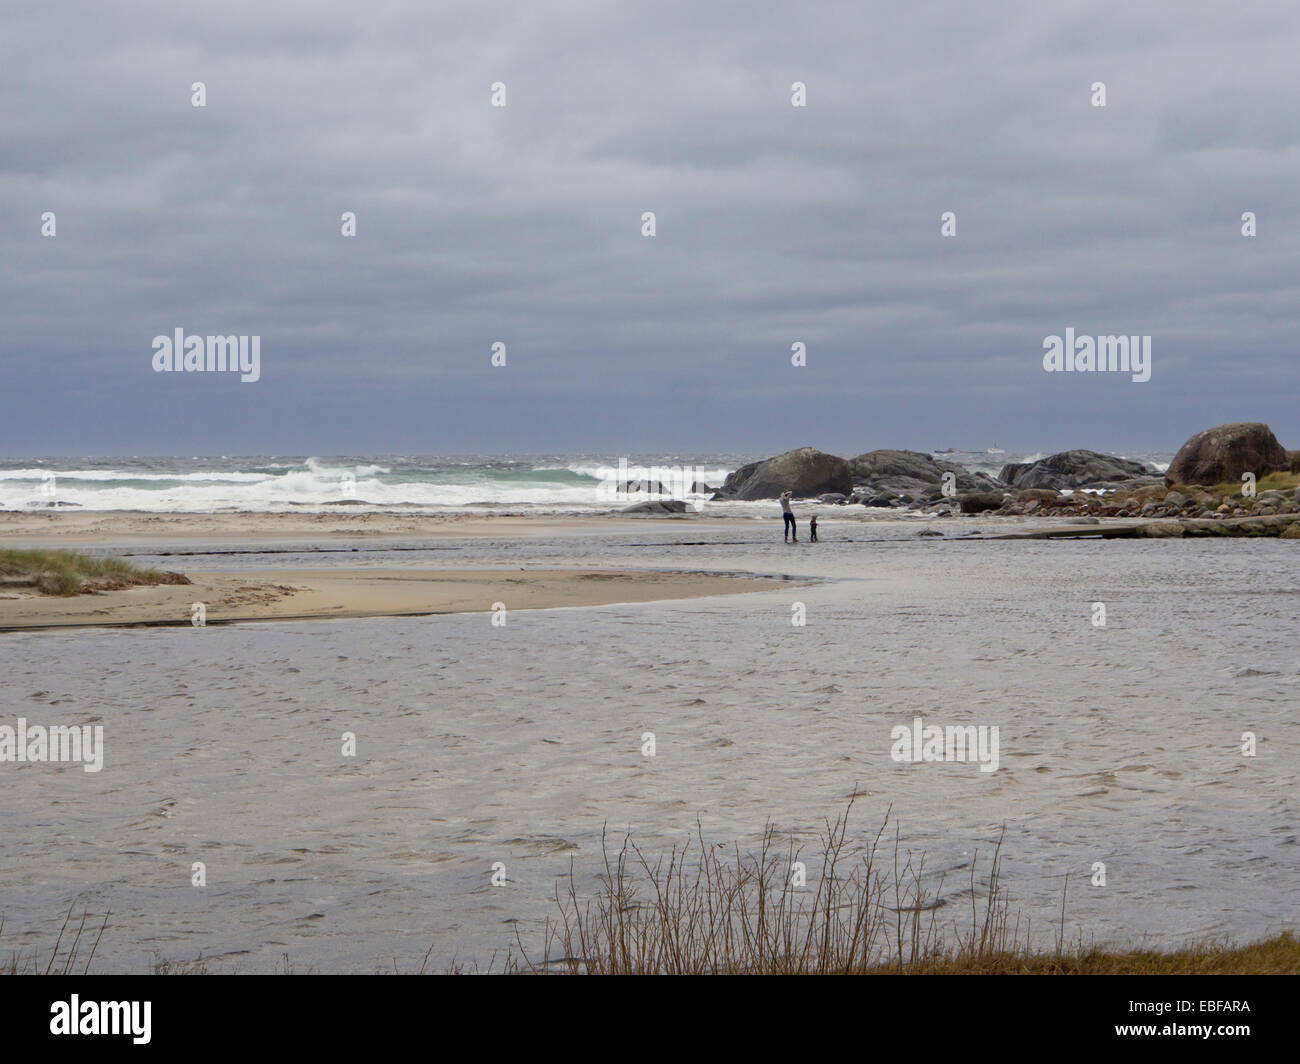 Autumn or winter storms on Jaeren, west coast of Norway near Stavanger waves breaking over stones and beach two people in water Stock Photo